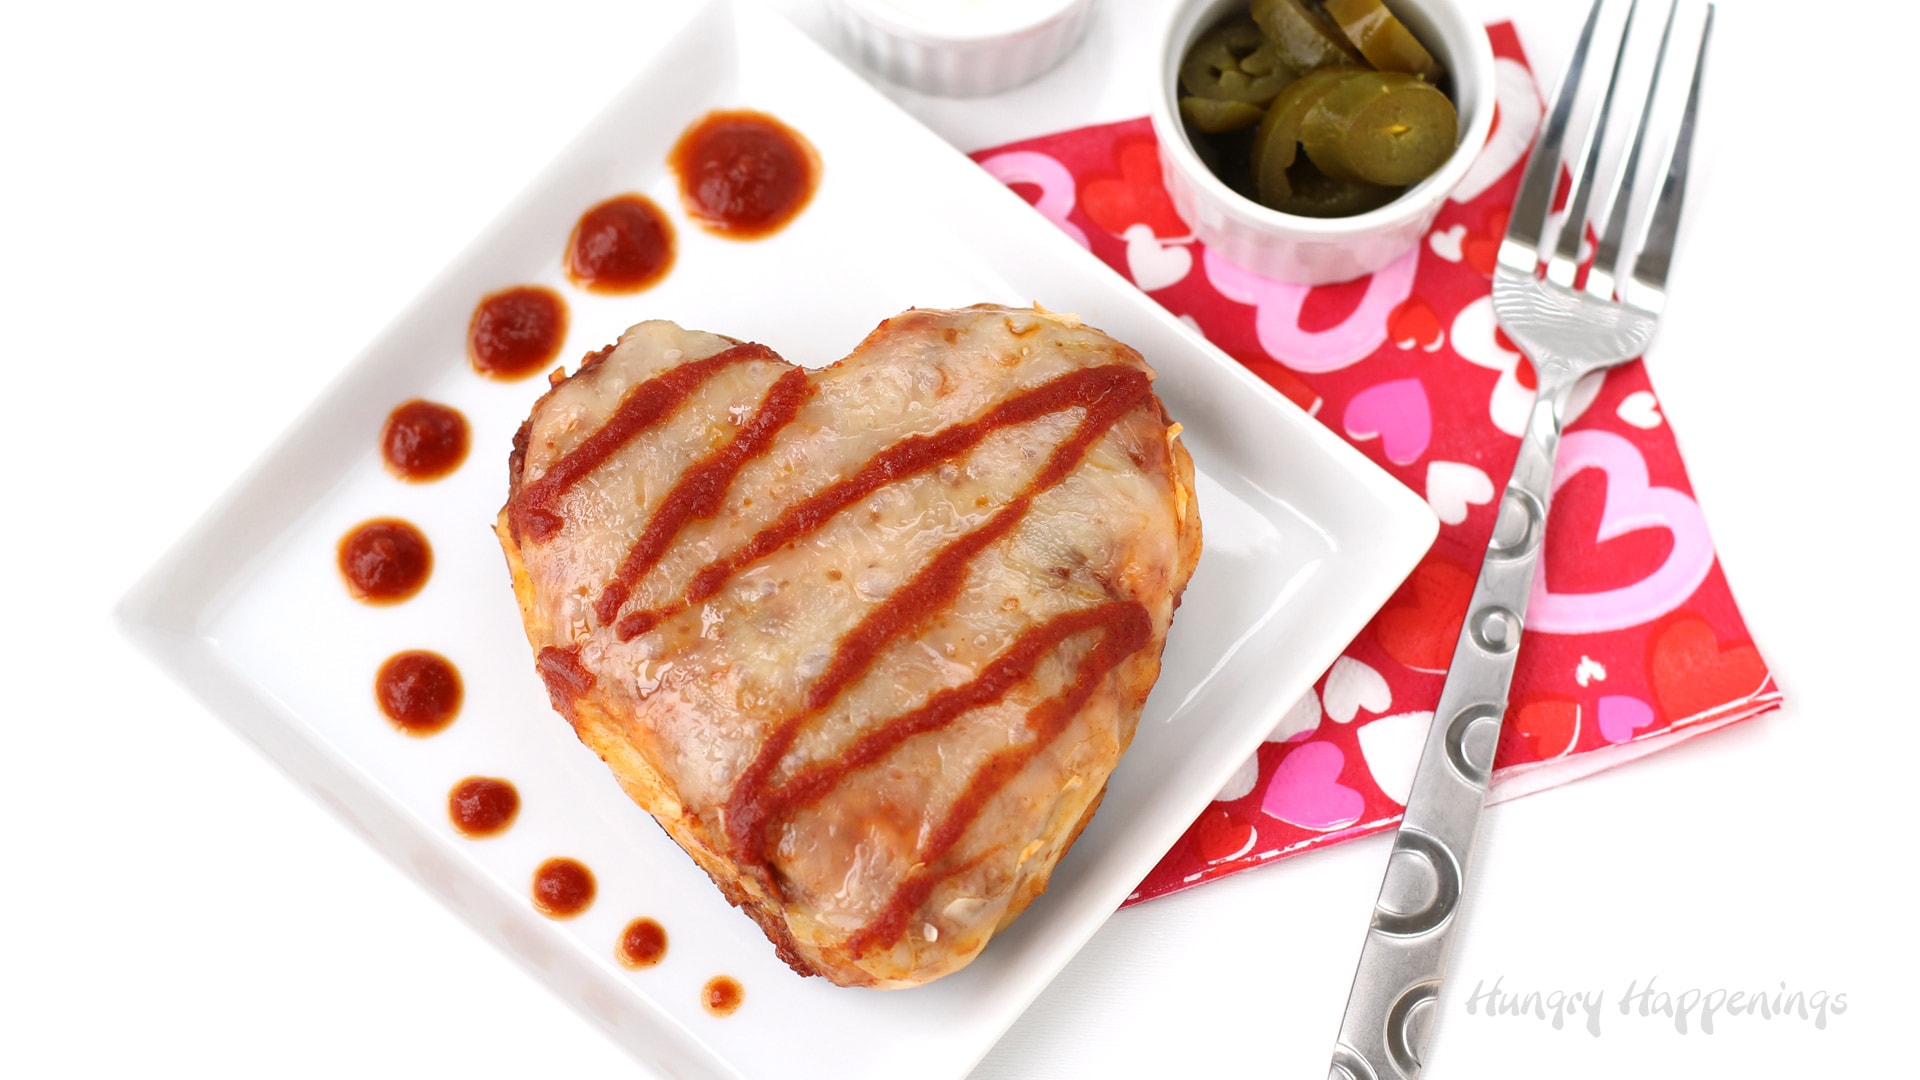 Valentine's Day dinner recipe - chicken and cheese enchilada hearts served with jalapenos, sour cream, and chili sauce